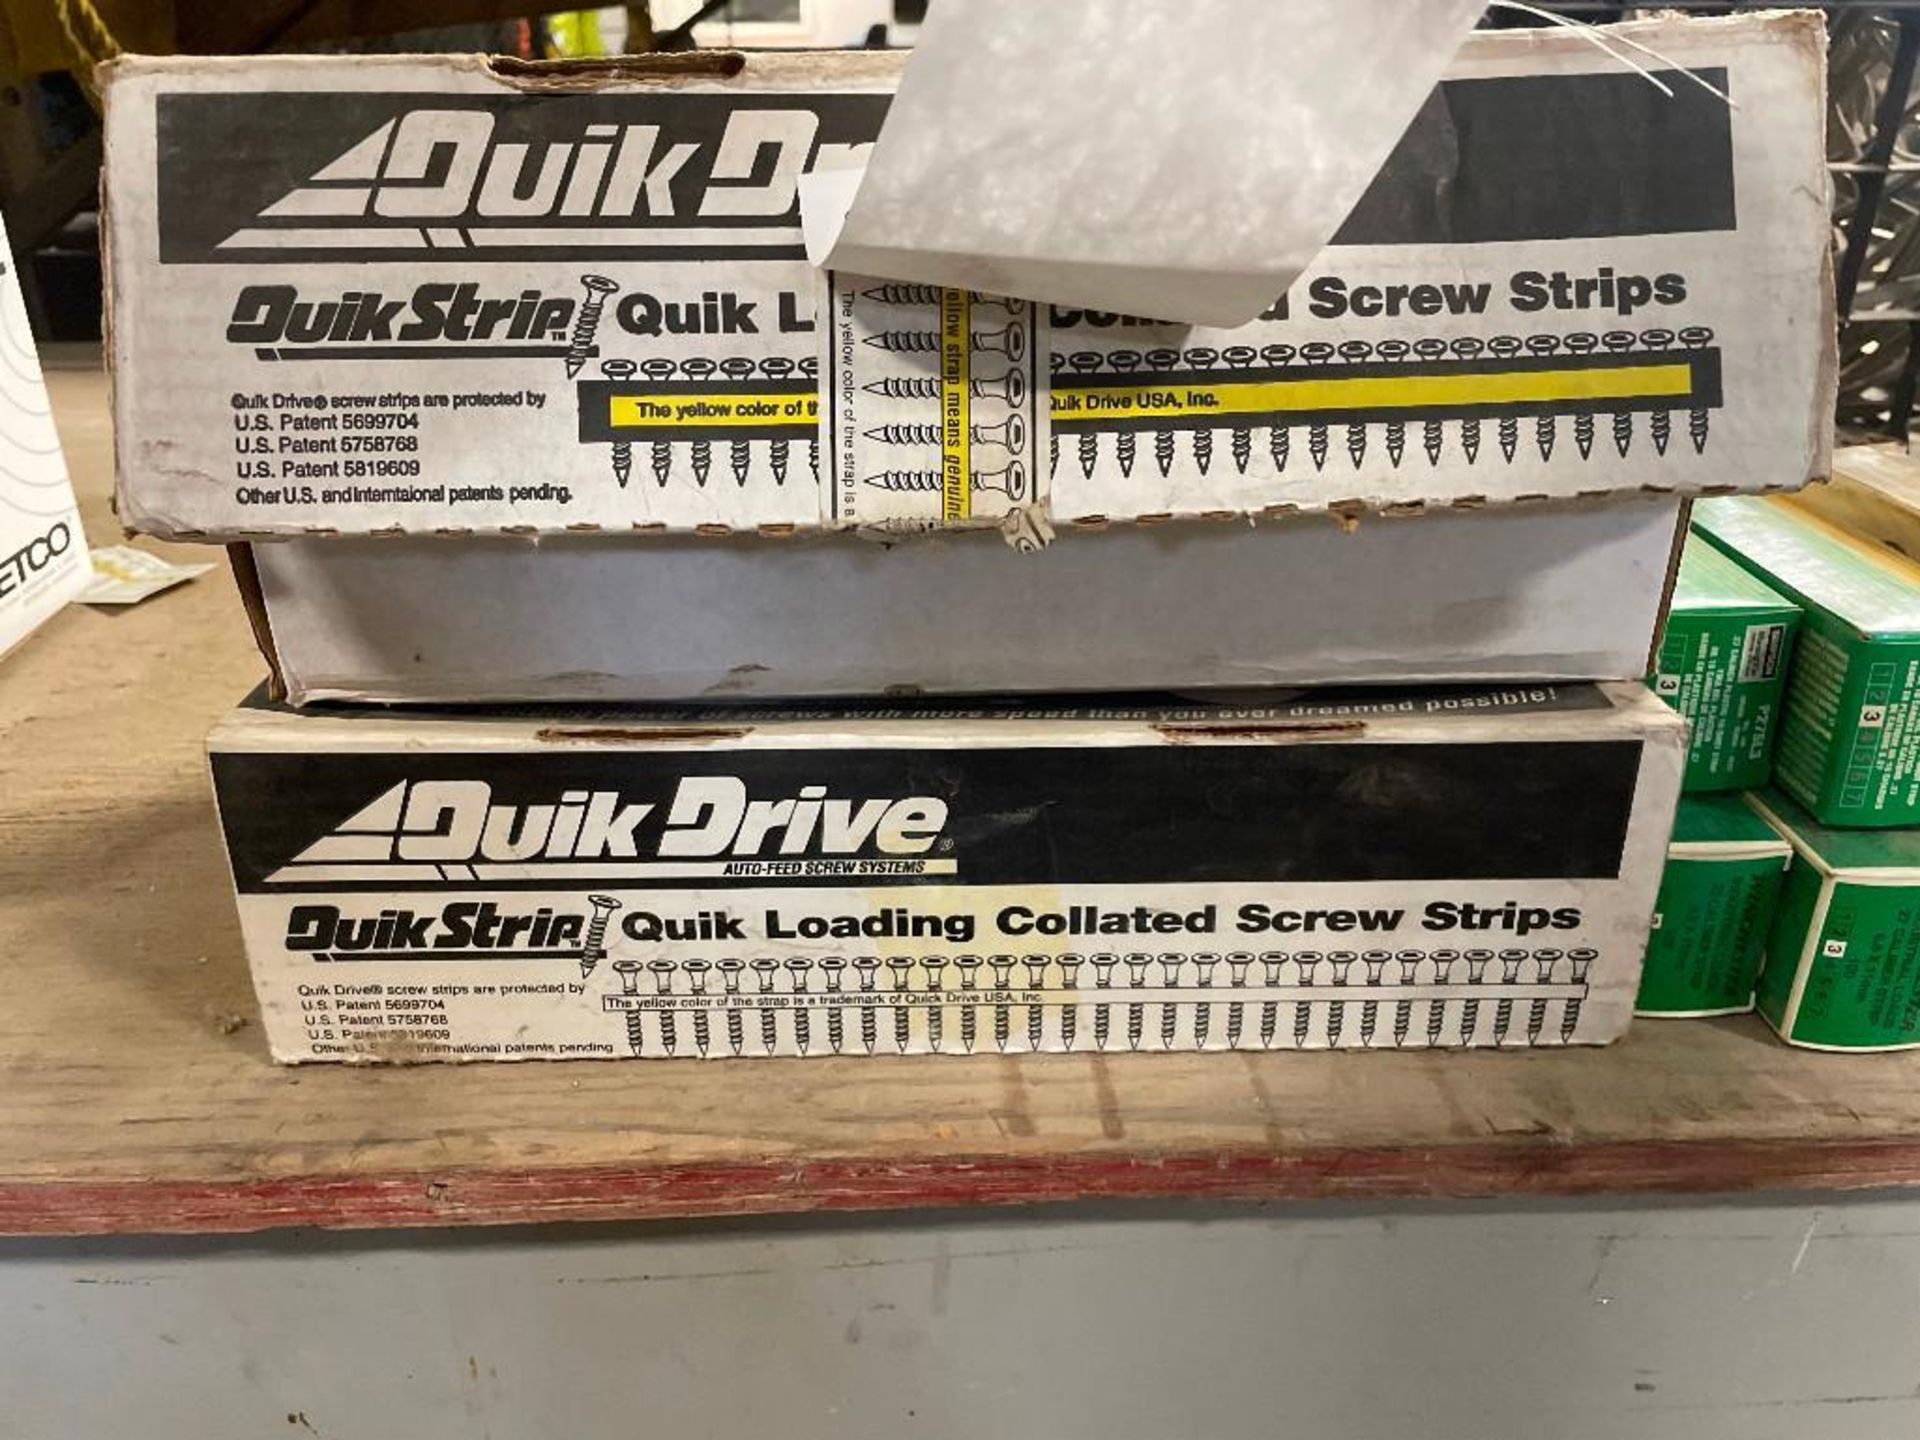 (2) Boxes QuikStrip Quik Loading Collated Screw Strips & Simpson P27SL4 & P27SL3. Located in Hazelwo